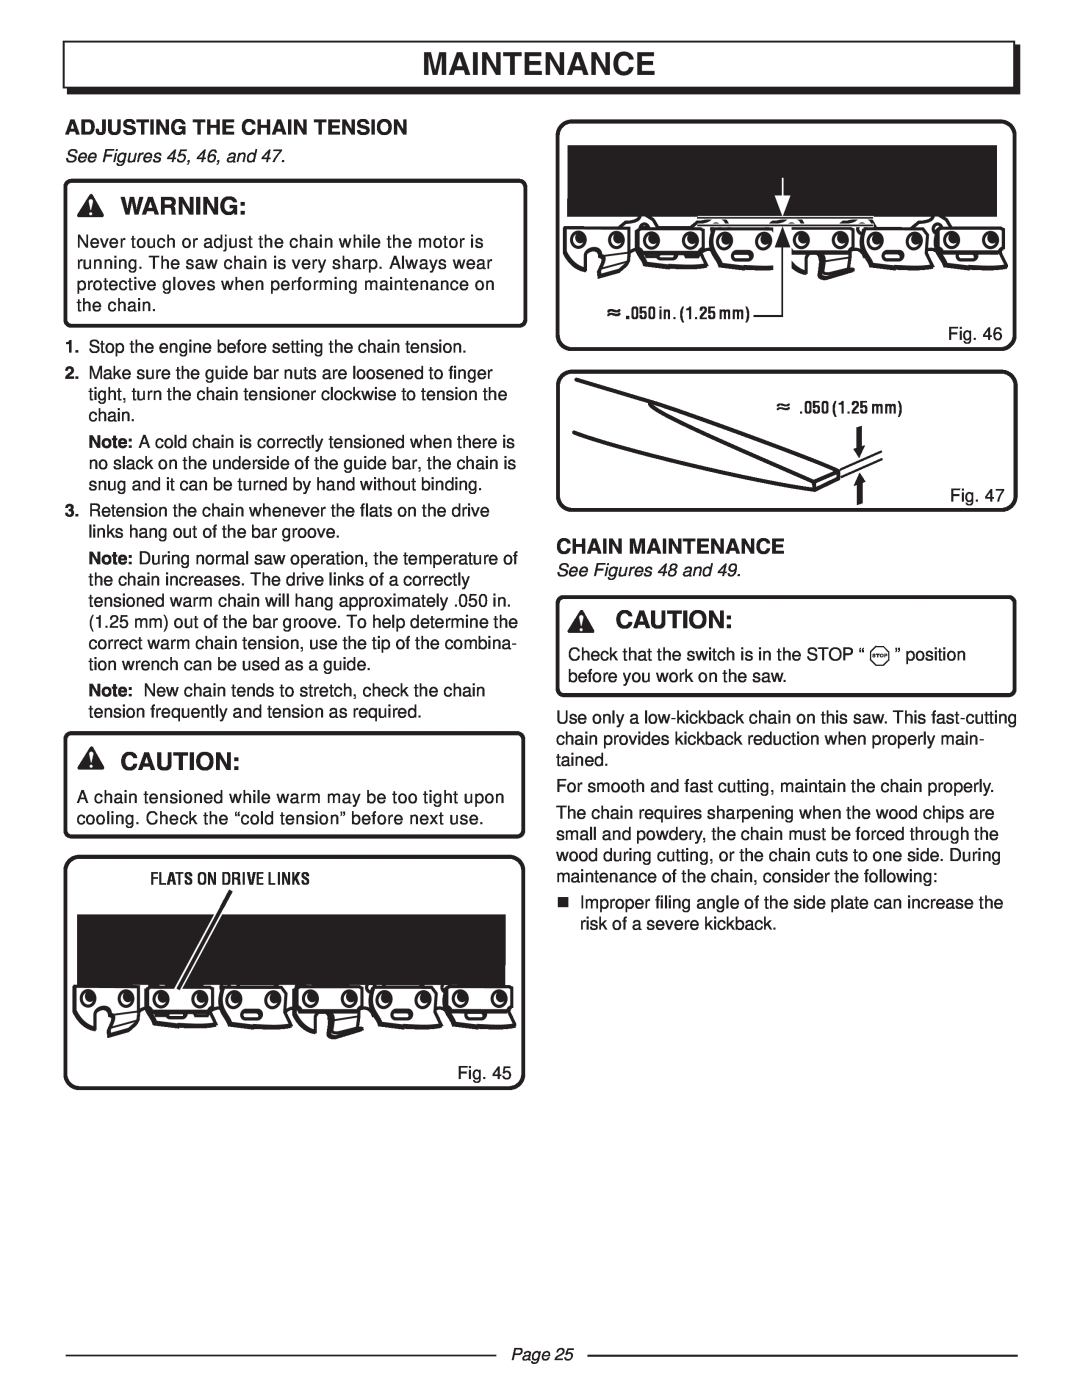 Homelite UT10510A manual Adjusting The Chain Tension, Chain Maintenance, See Figures 45, 46, and, See Figures 48 and, Page 